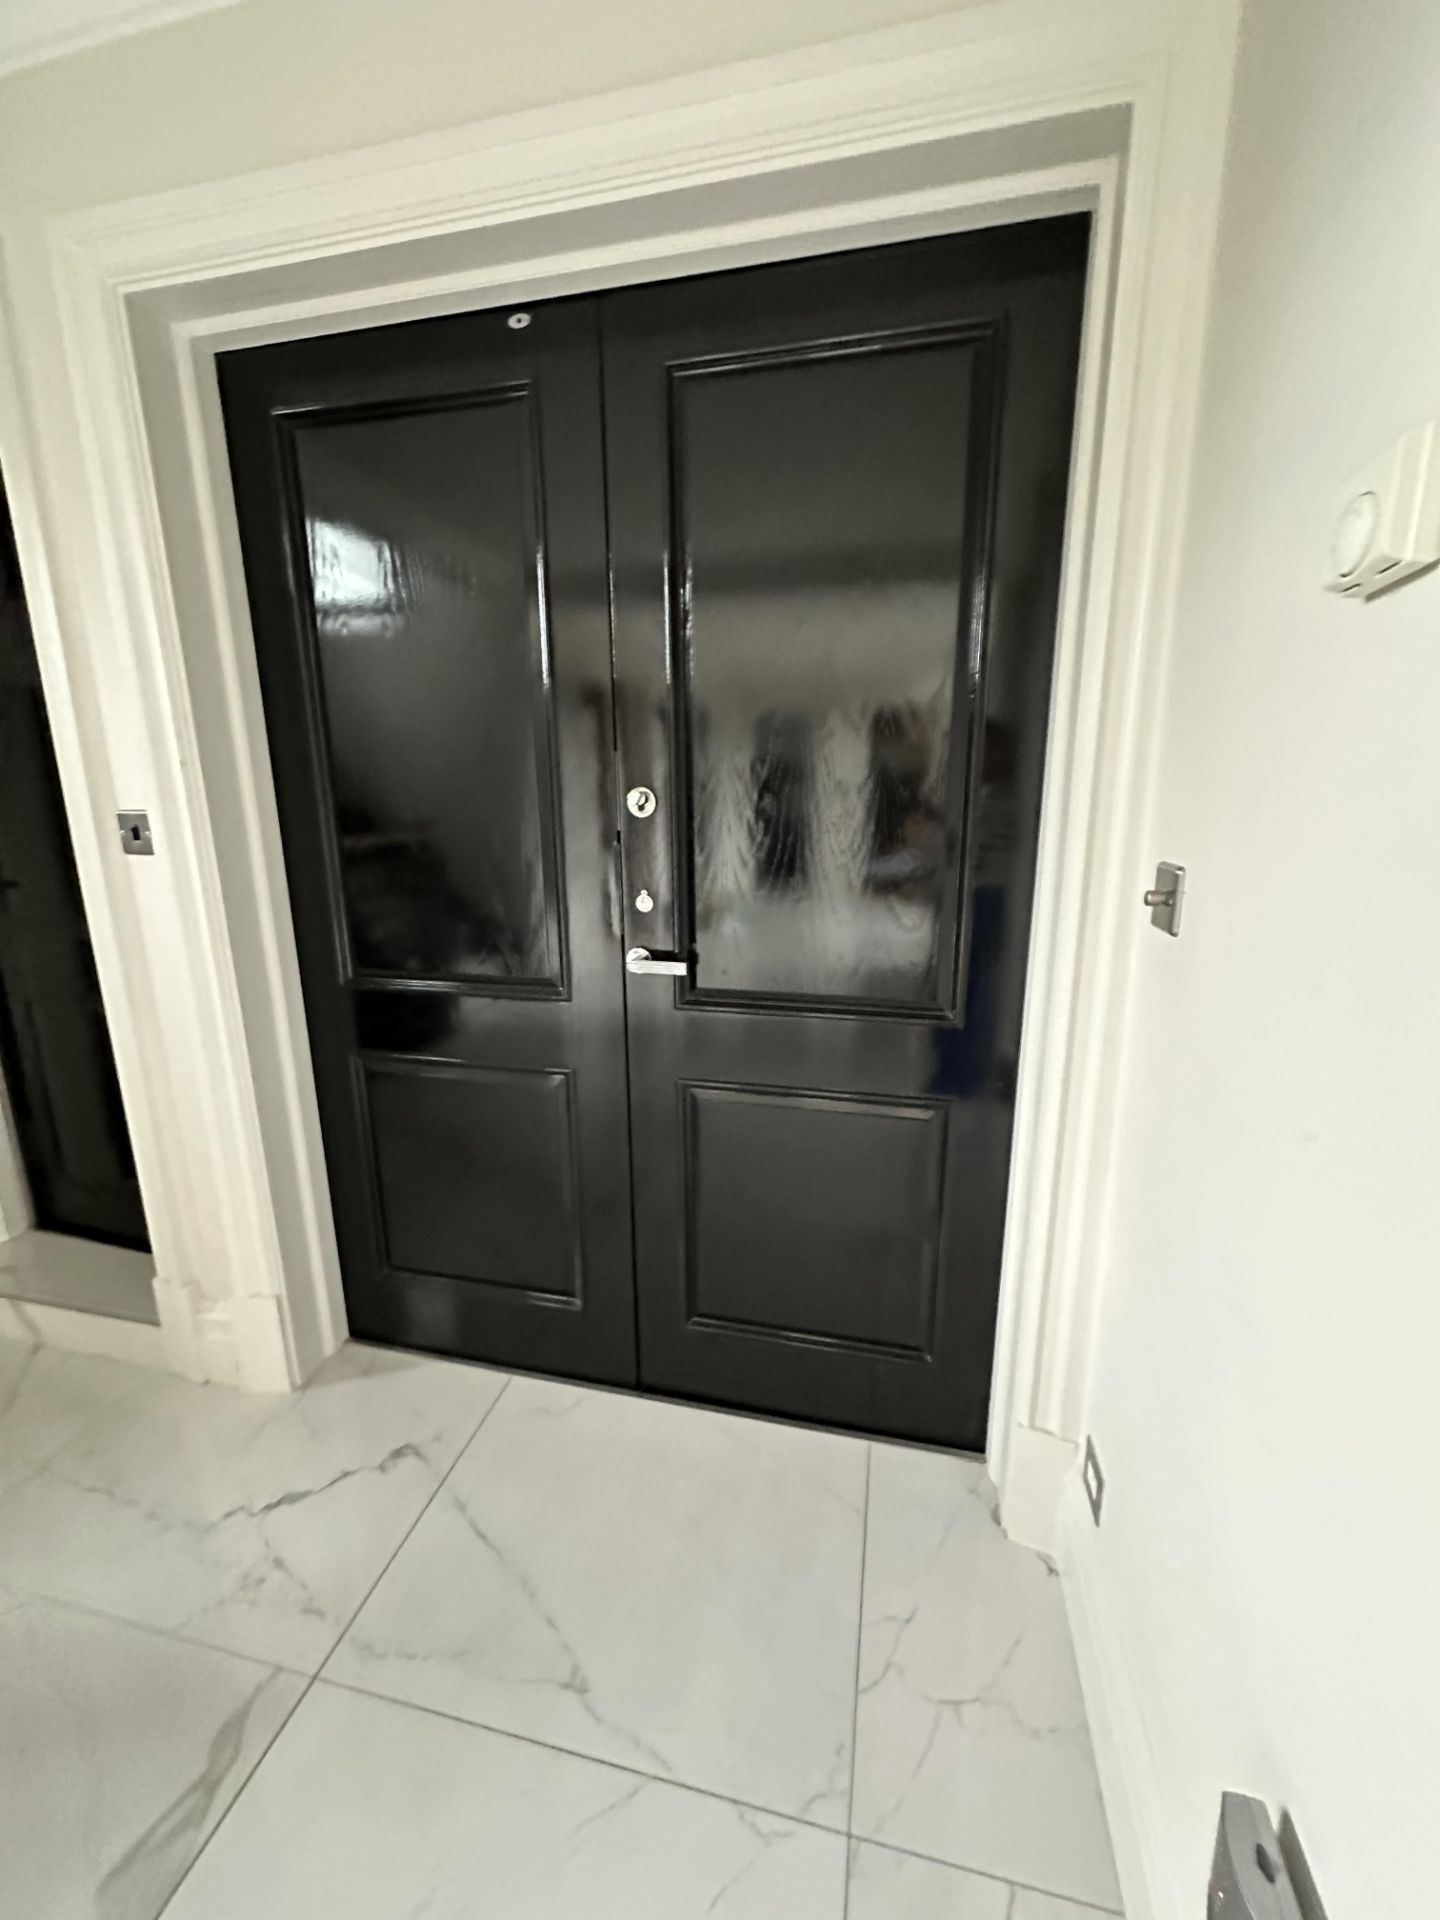 1 x DOUBLE SOLID OAK Fire Door In Black Gloss And Stainless Steel Hardware - Ref: KKH118 - CL848 -